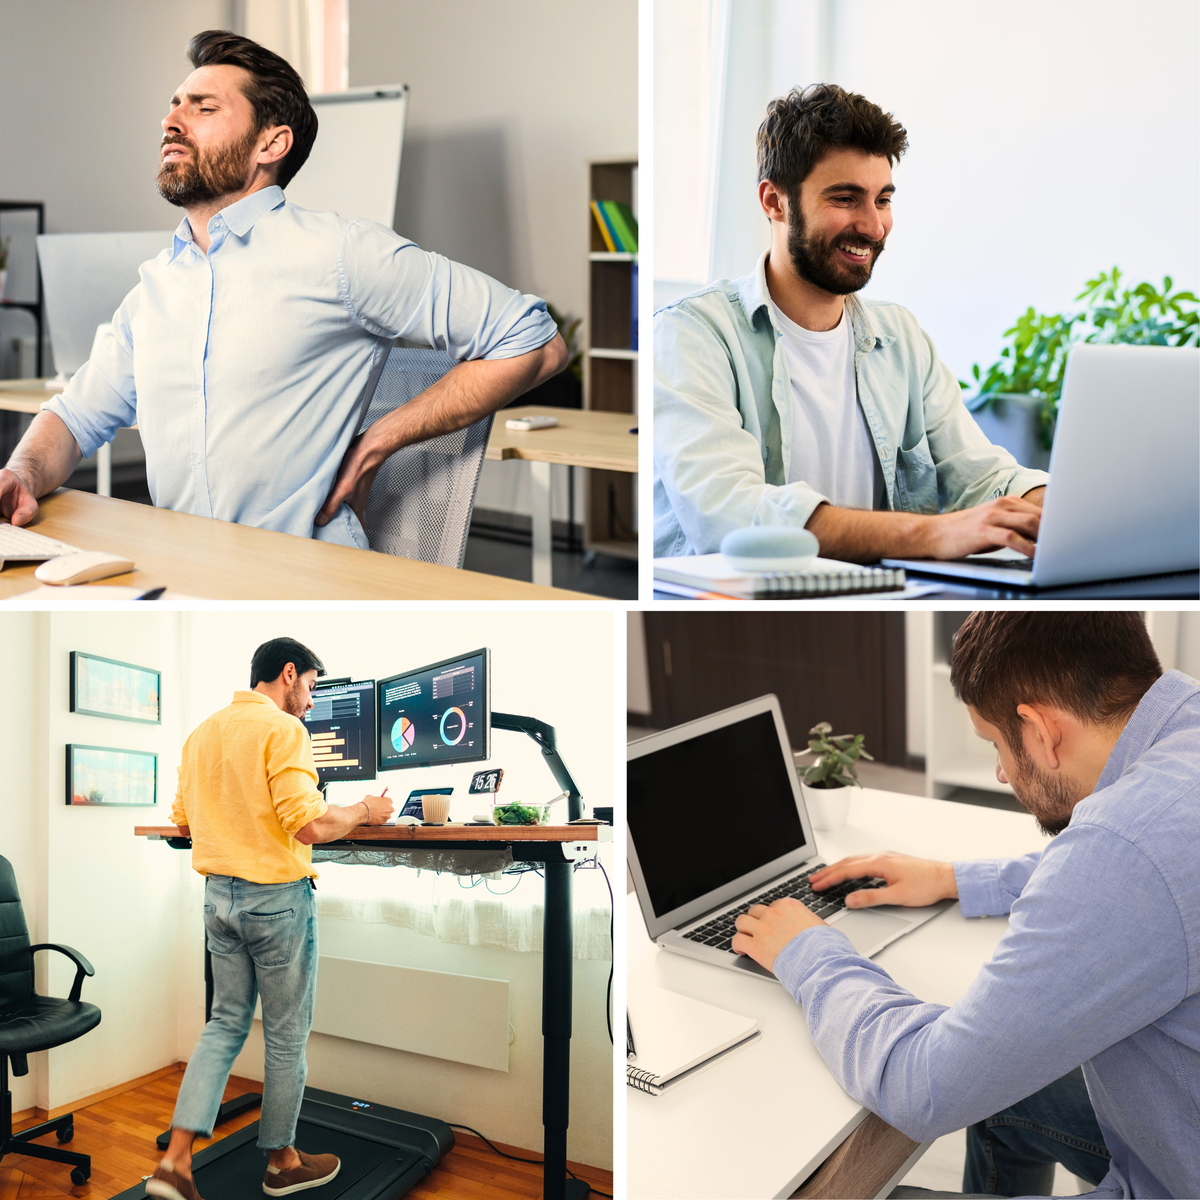 Man with hurting back at desk, man with proper posture, man with stand up desk, man slouching at desk